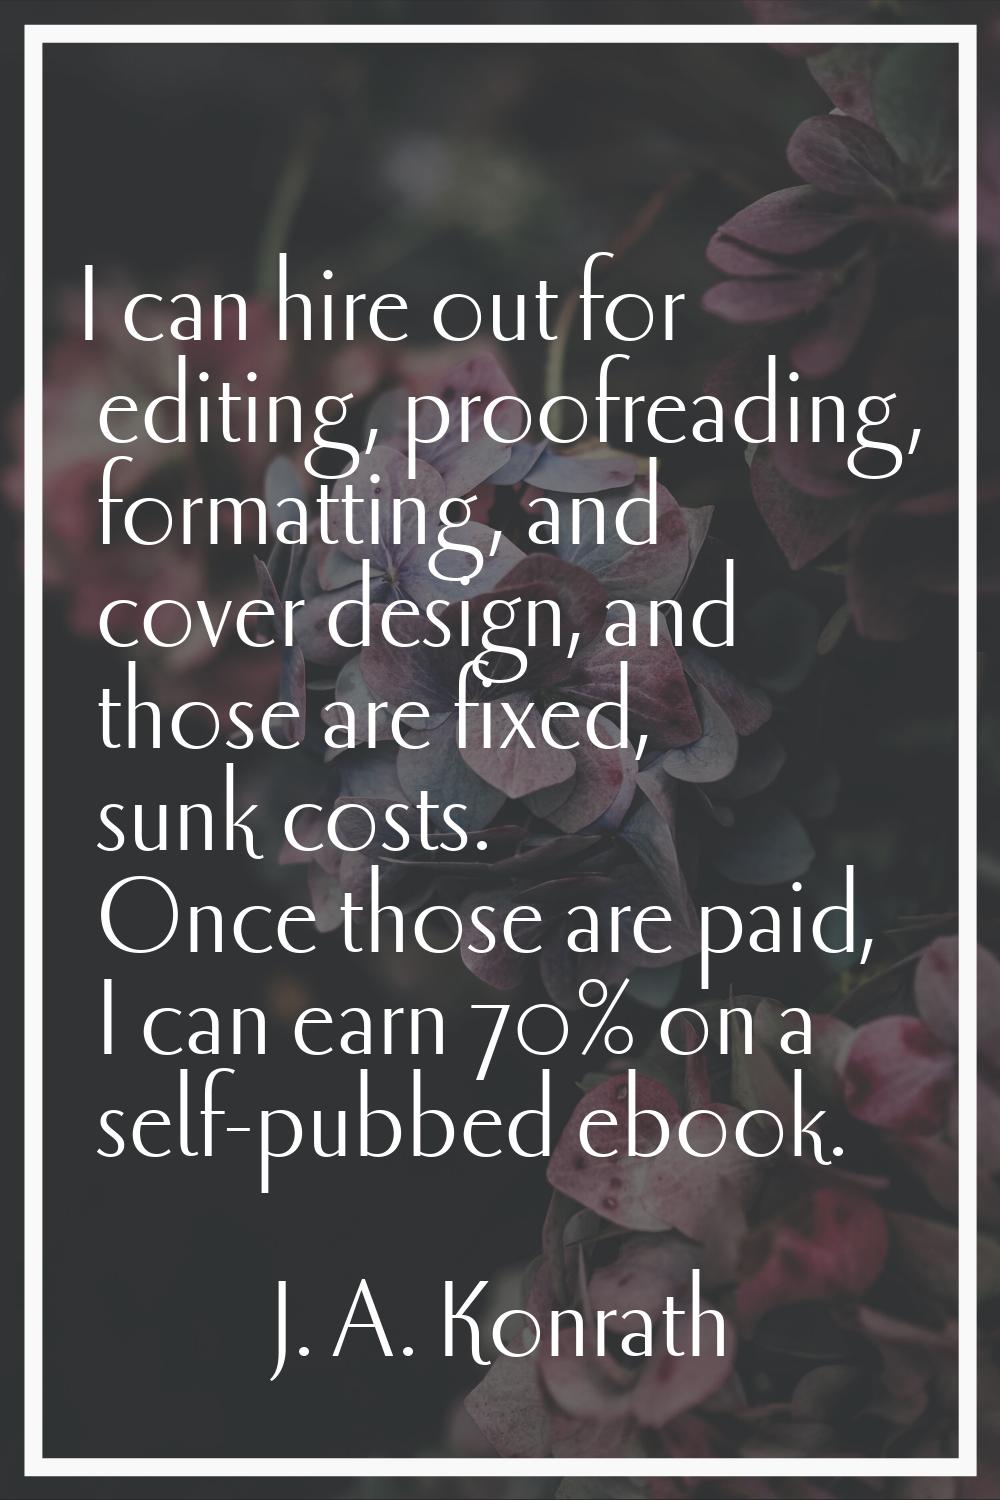 I can hire out for editing, proofreading, formatting, and cover design, and those are fixed, sunk c